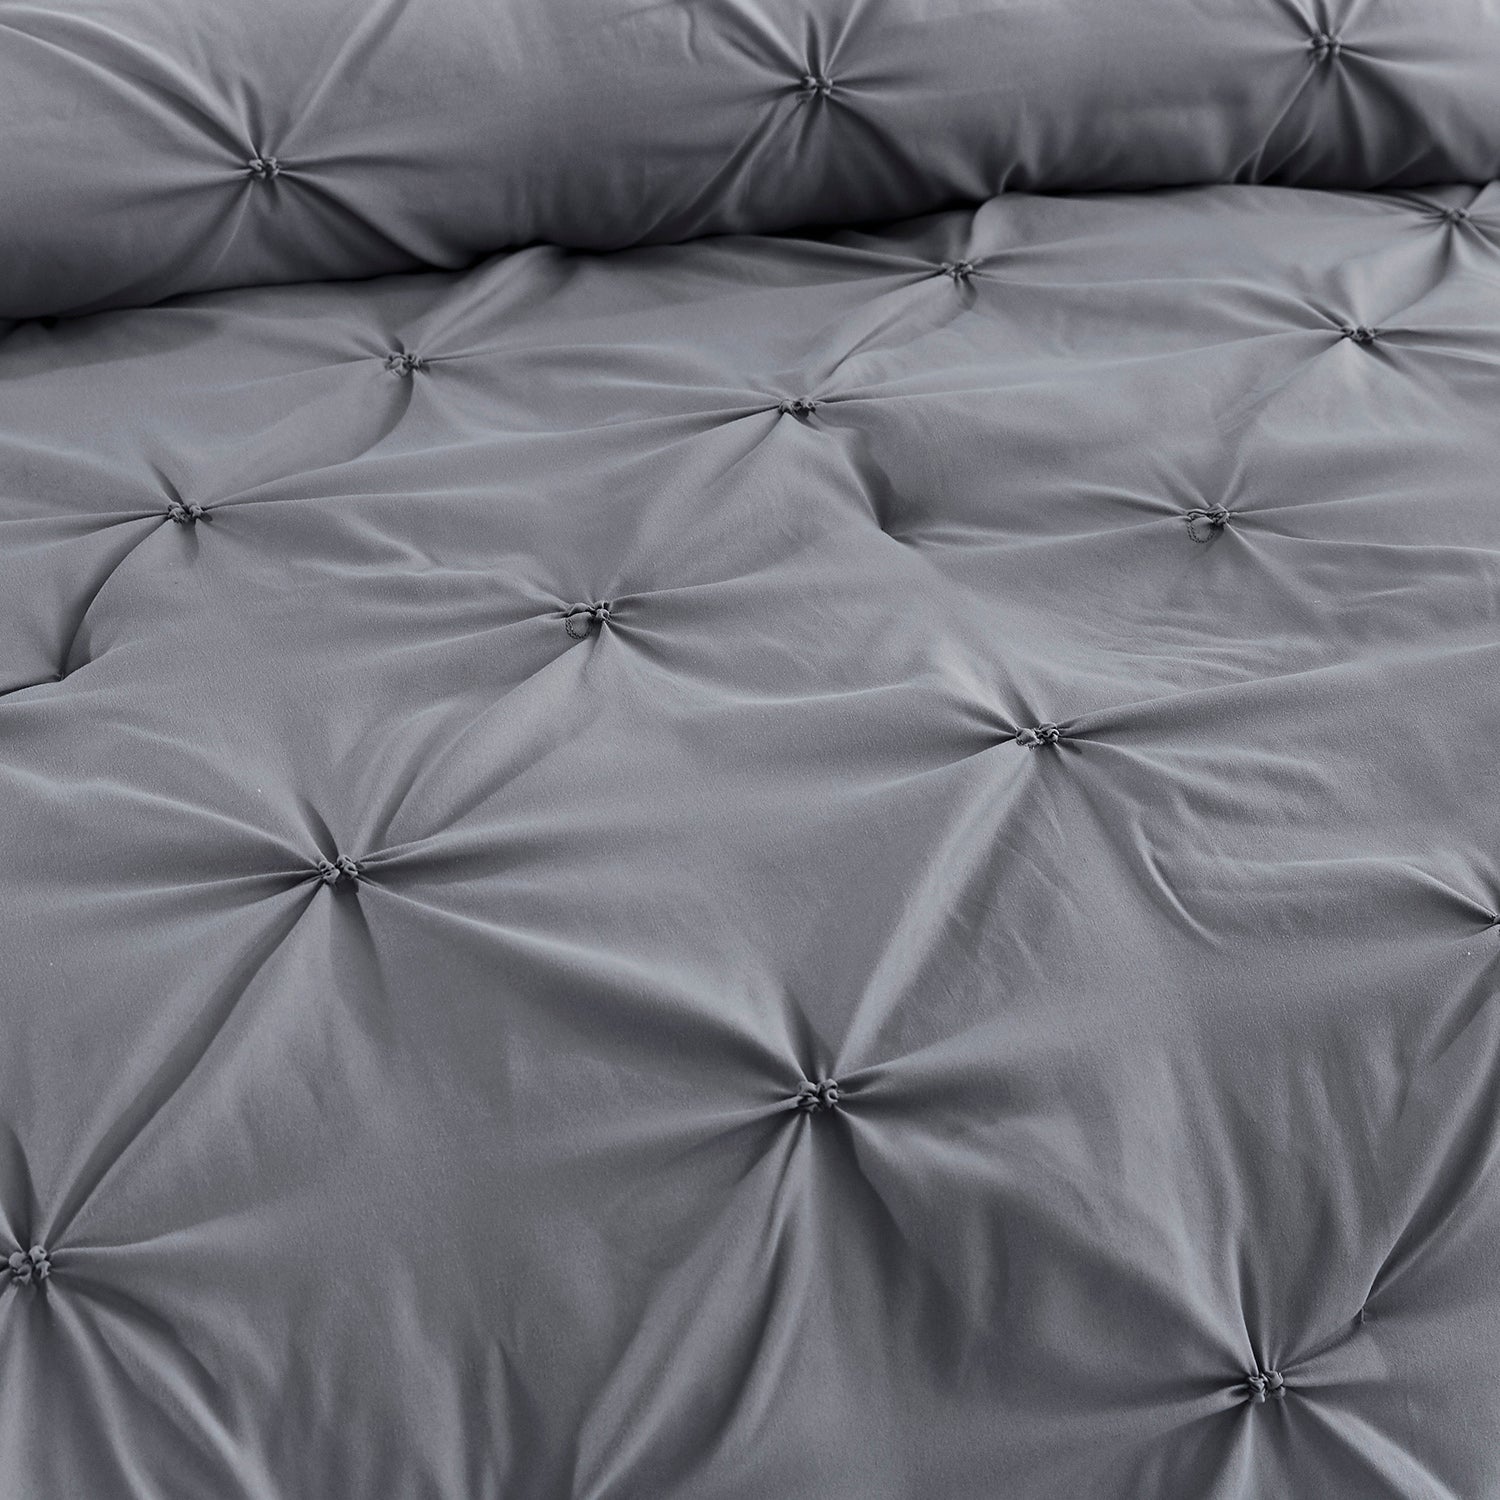 HANIA 5PC GRAY BEDDING COMFORTER SET. RUFFLE & PATCHWORK, MICROFIBER FABRIC, FADE RESISTANT, SUPER SOFT, BED IN A BAG